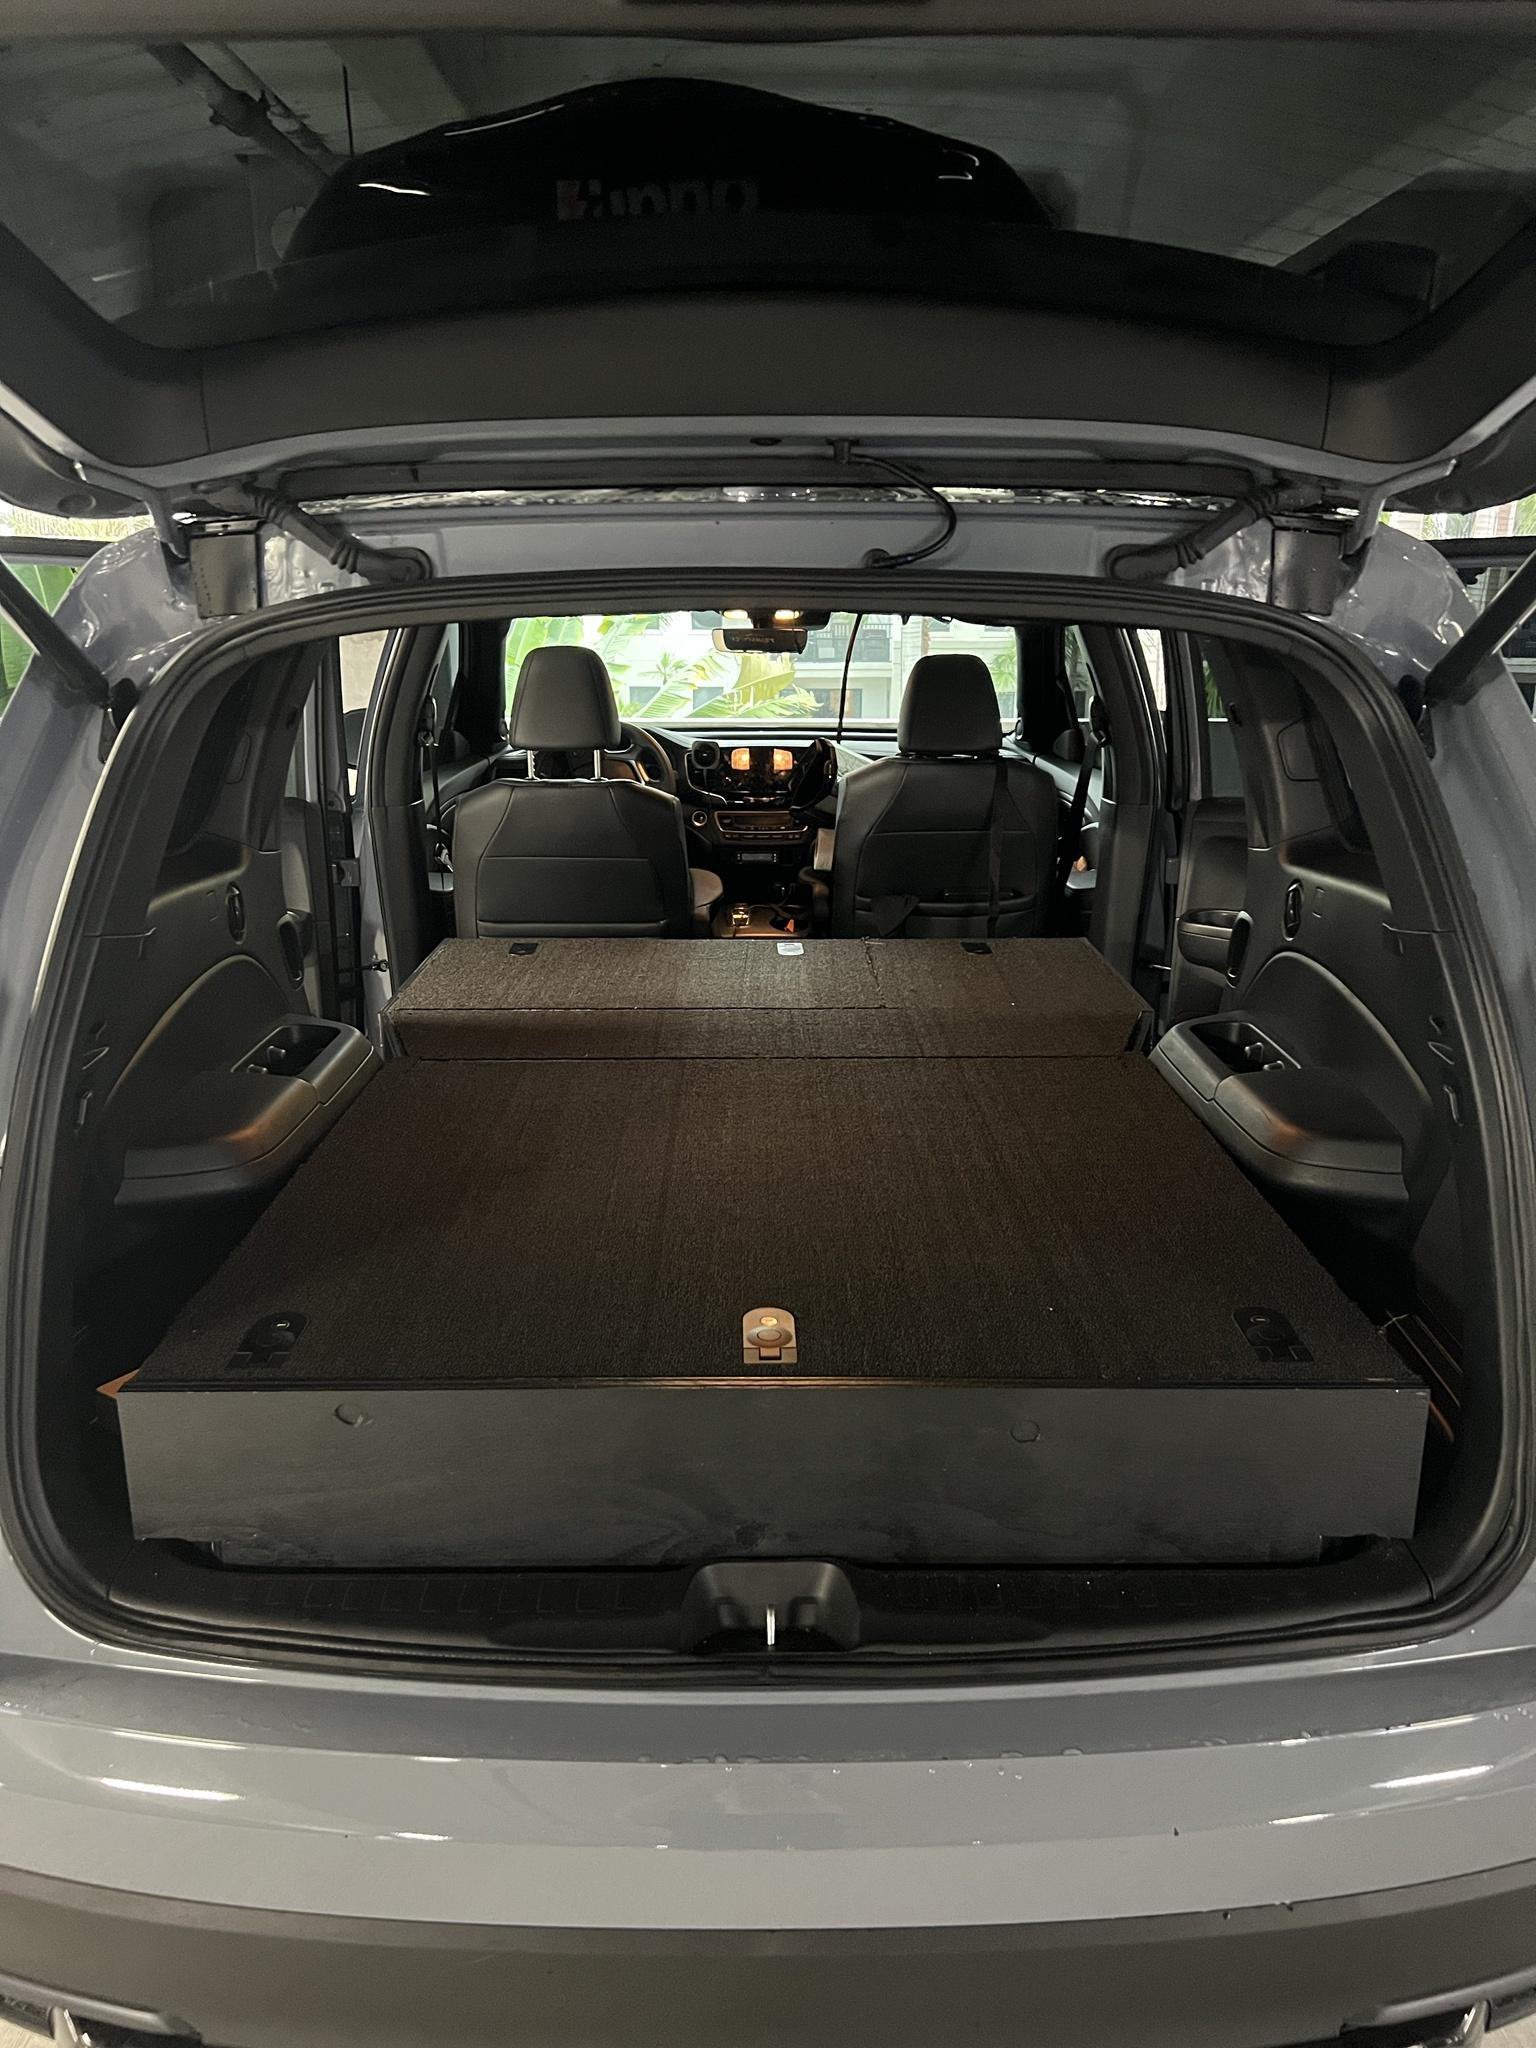 My Honda Pilot storage/platform build out, took longer than expected but now I’m ready to hit the road for 2+ months : overlanding